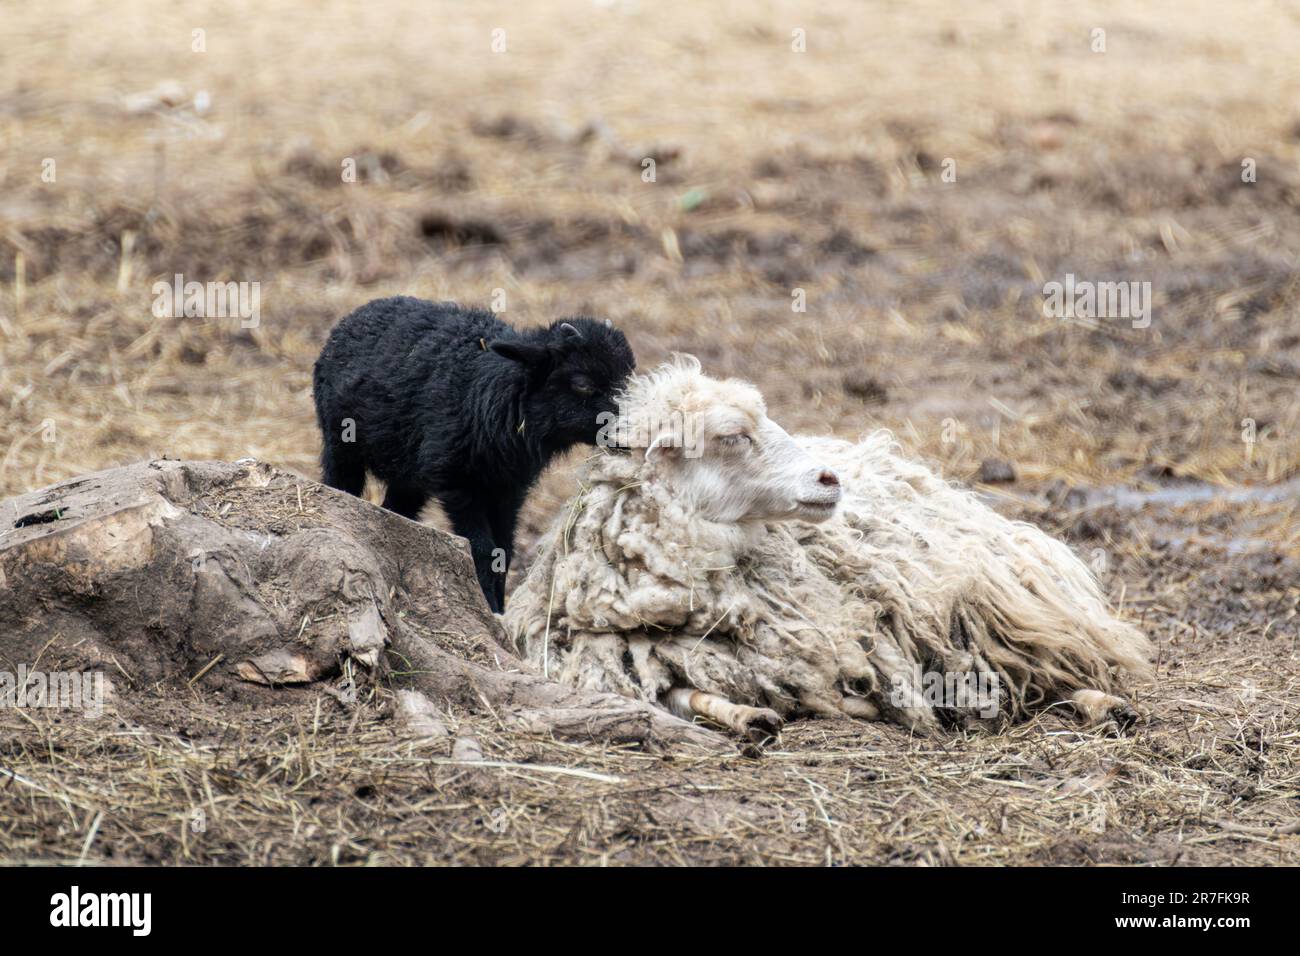 White fluffy sheep with black lamb resting on farm ground. Domestic animal laying down Stock Photo